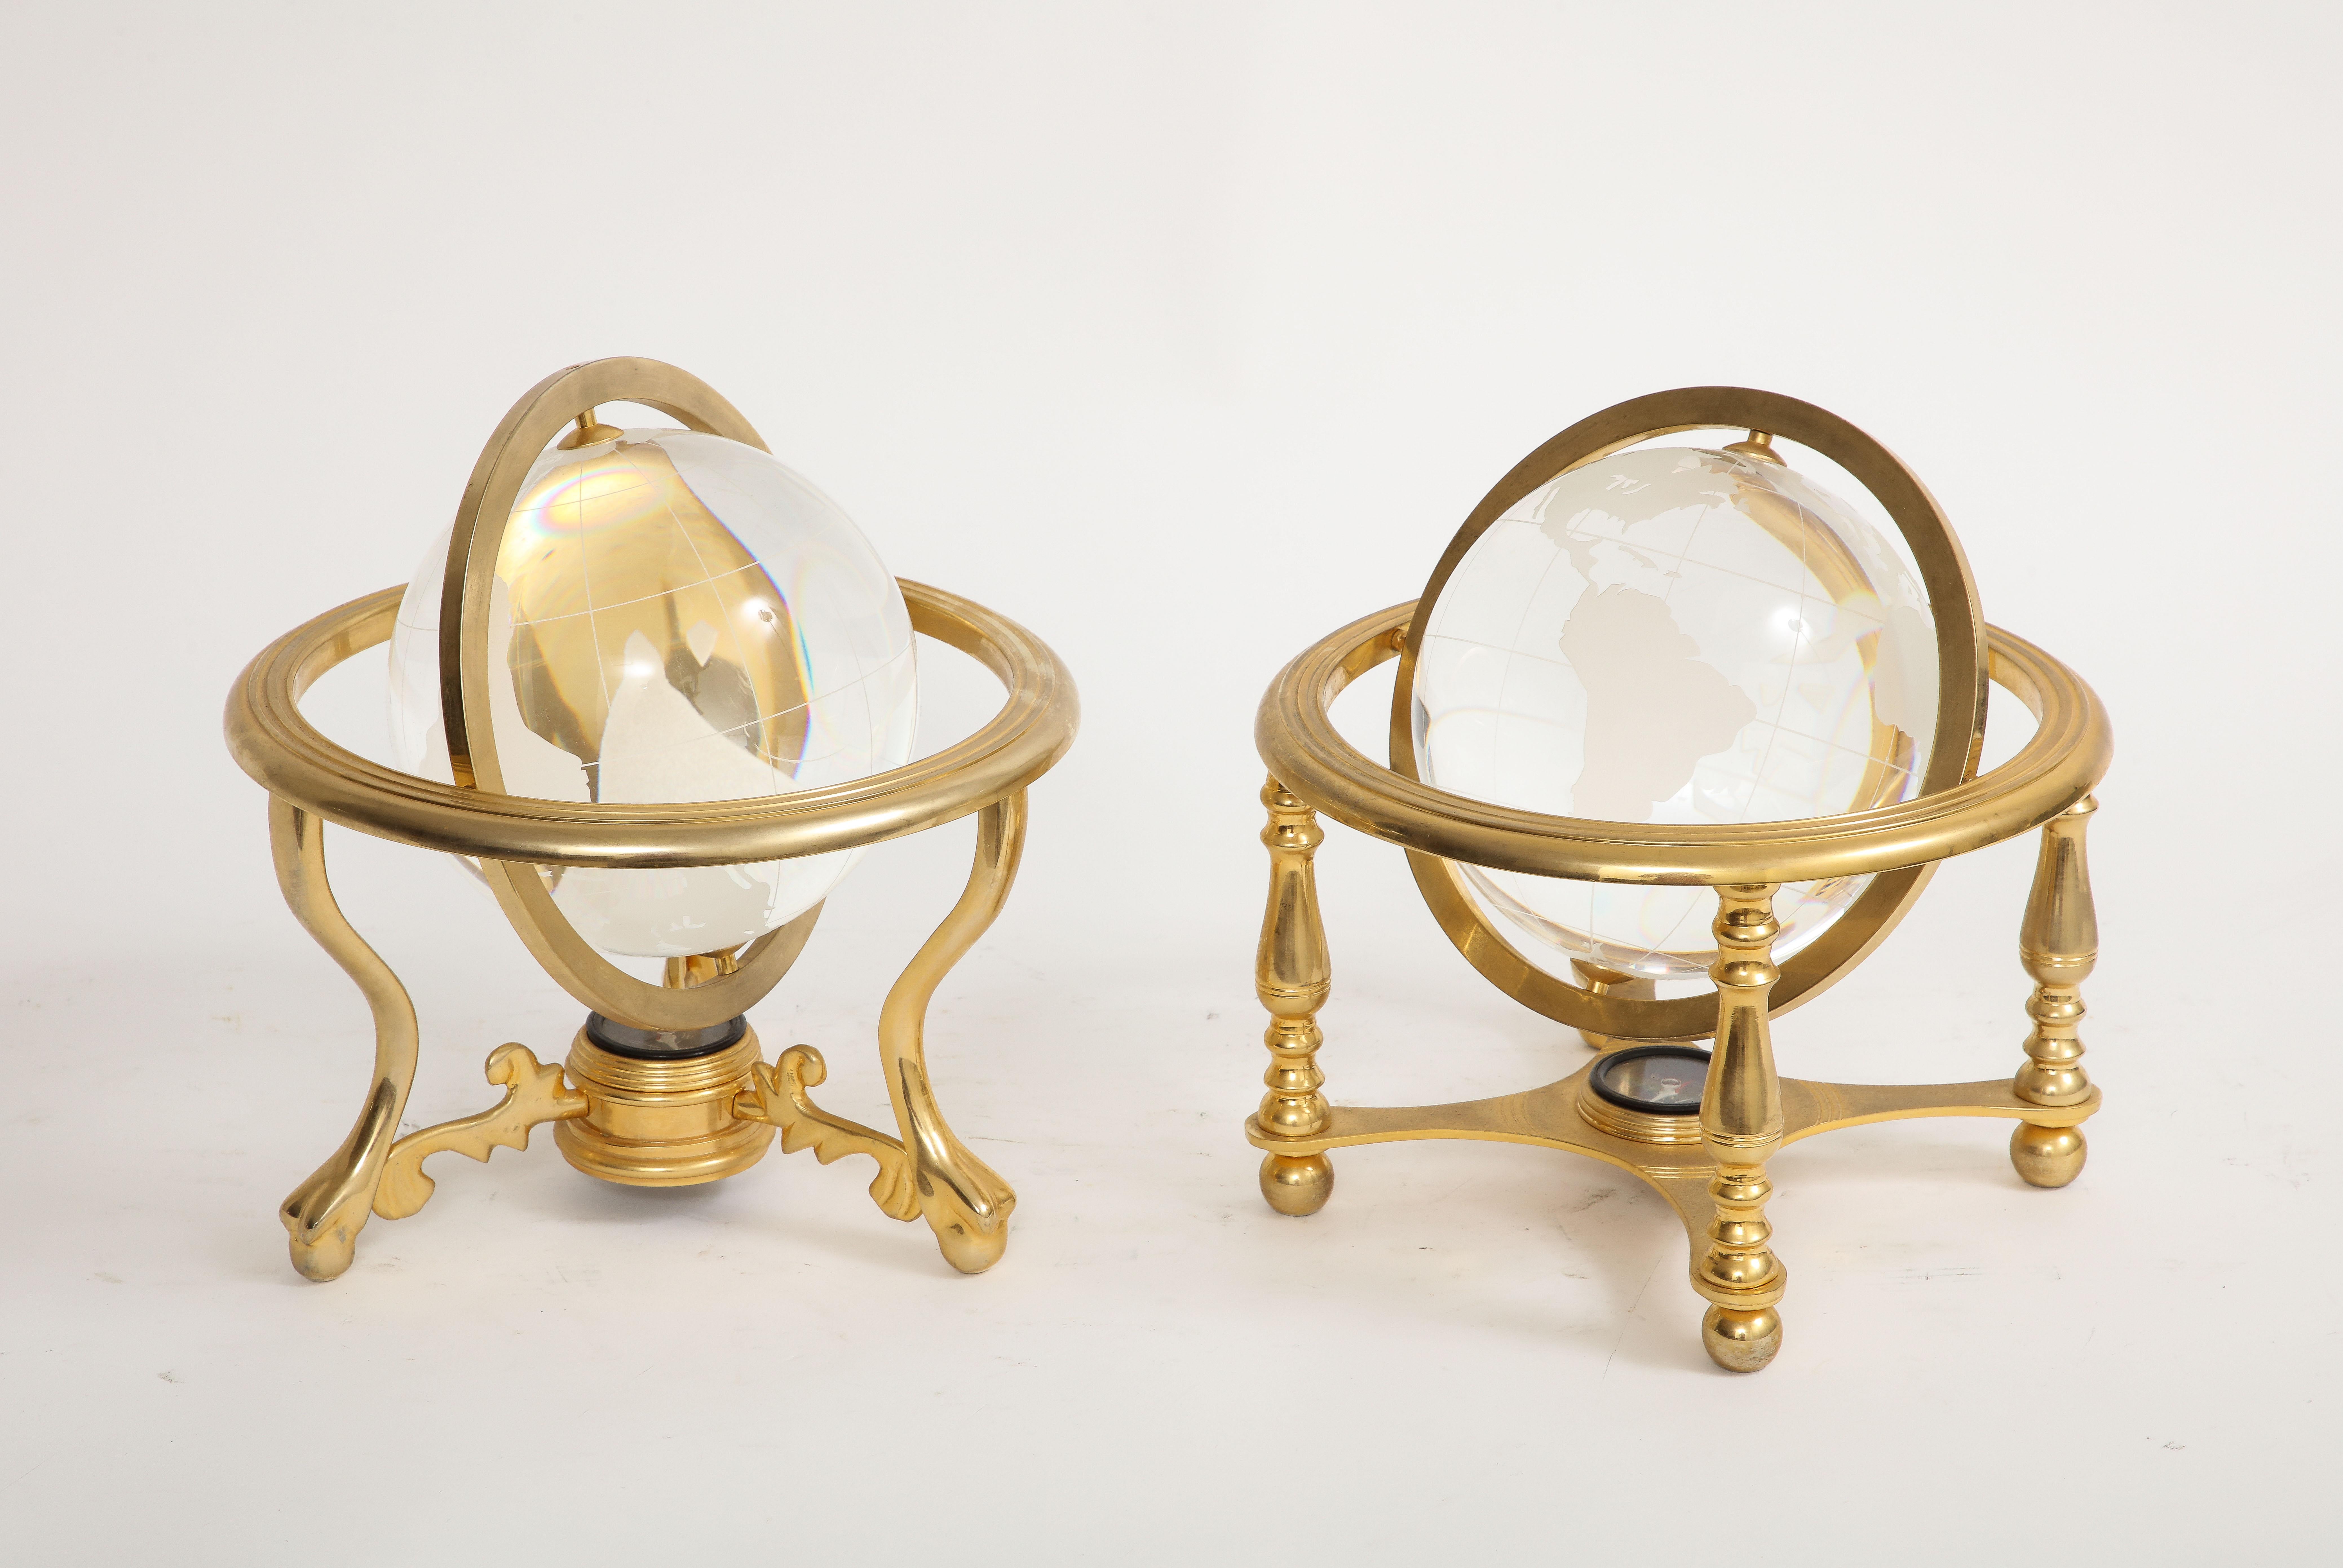 Two Mid-Century Modern French gilt bronze mounted crystal models of globes. Each with a classical globe style enhanced with a modern twist. The bronze mounts are all gilt and in the bottom center of each globe is a compass. The crystal globe balls